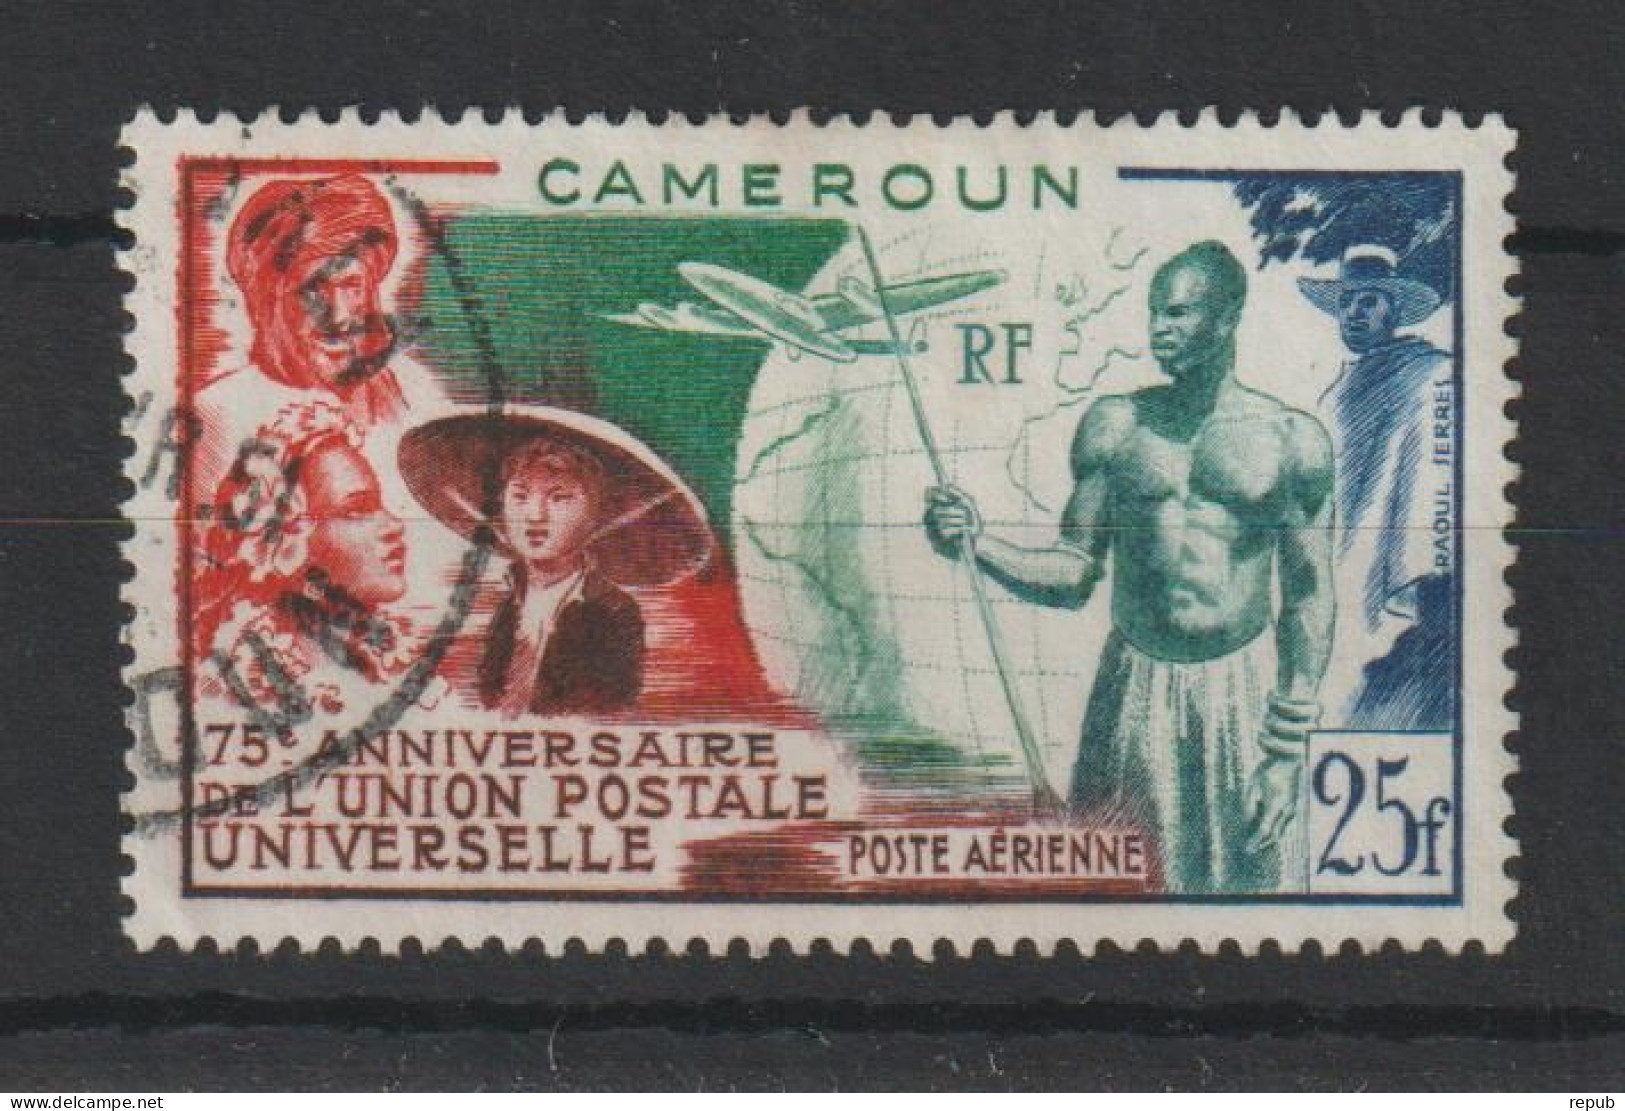 Cameroun 1949 UPU PA 42, 1 Val Oblit Used - Airmail